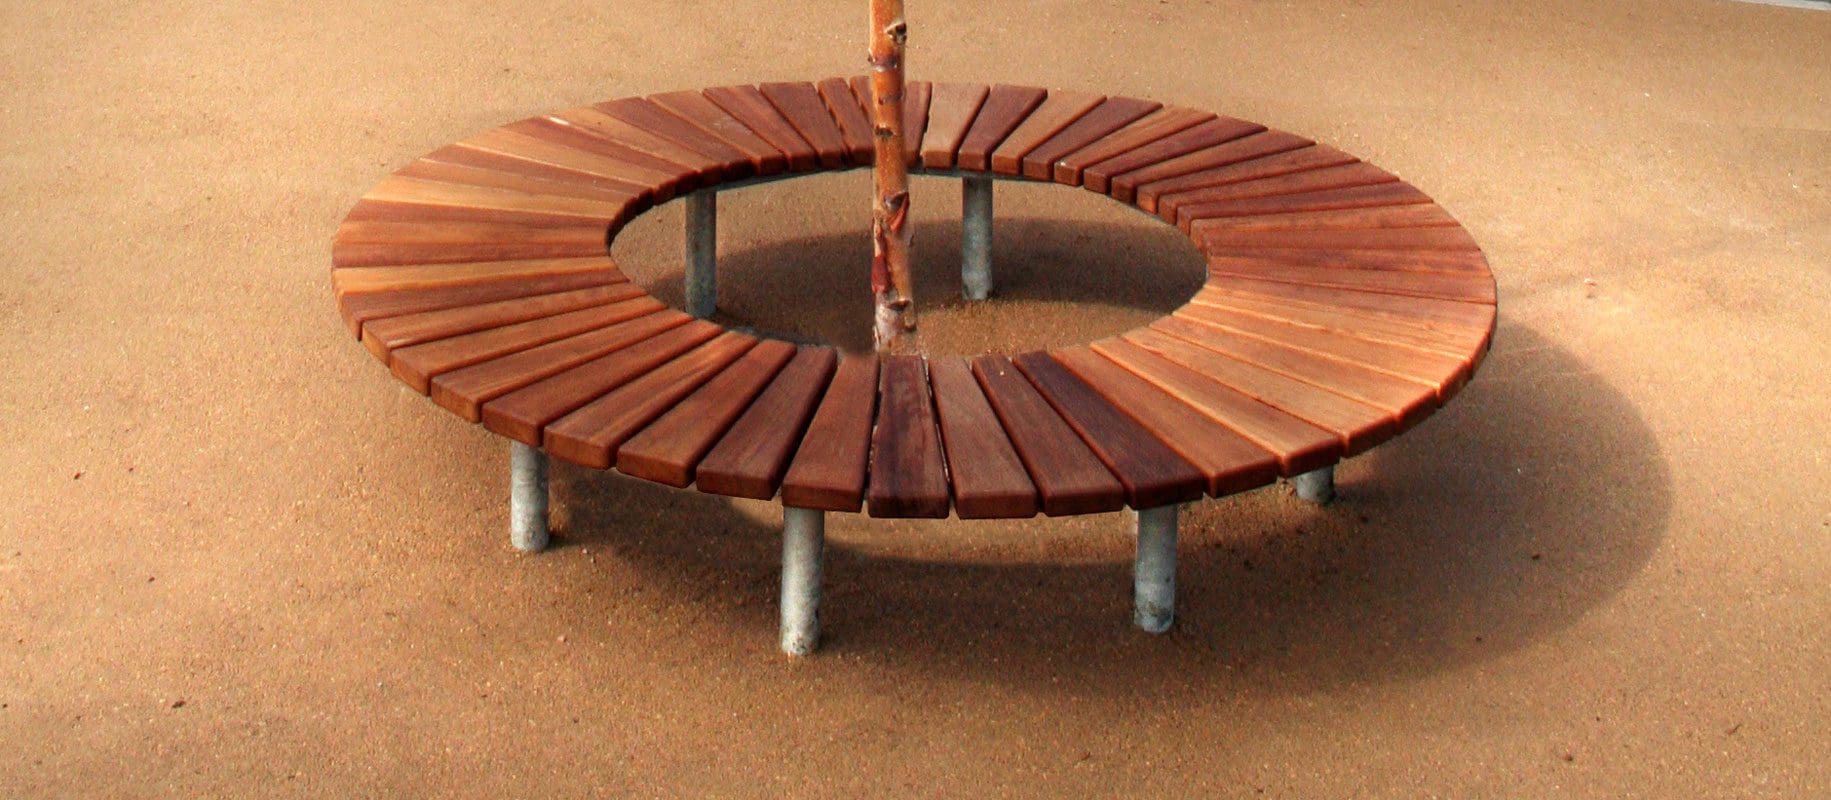 Wooden slatted circle bench with metal legs surrounding small tree